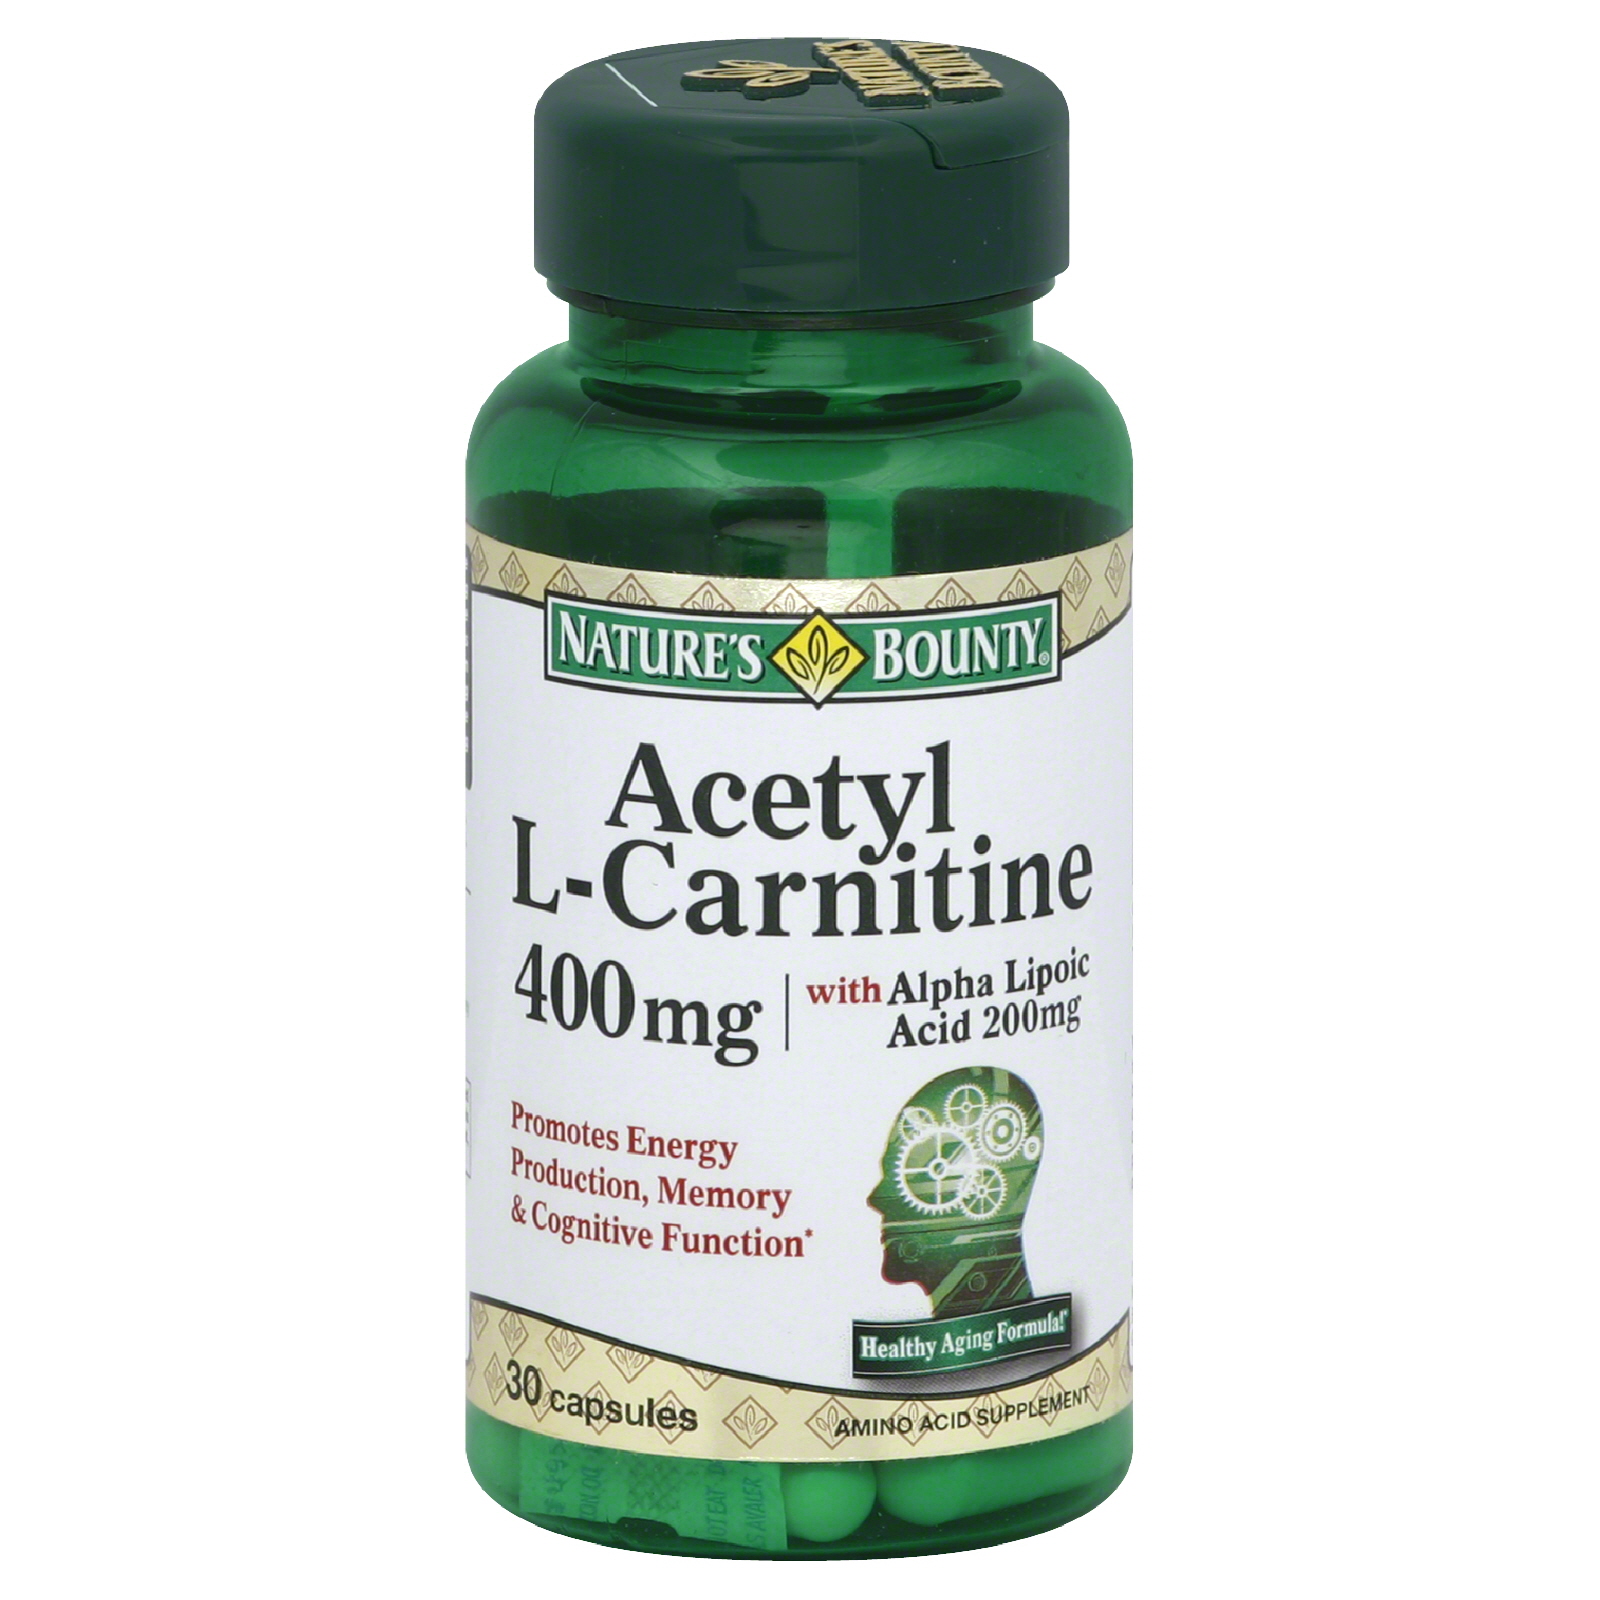 UPC 074312660702 product image for Acetyl L-Carnitine, 400 mg, with Alpha Lipoic Acid 200 mg, Capsules, 30 capsules | upcitemdb.com